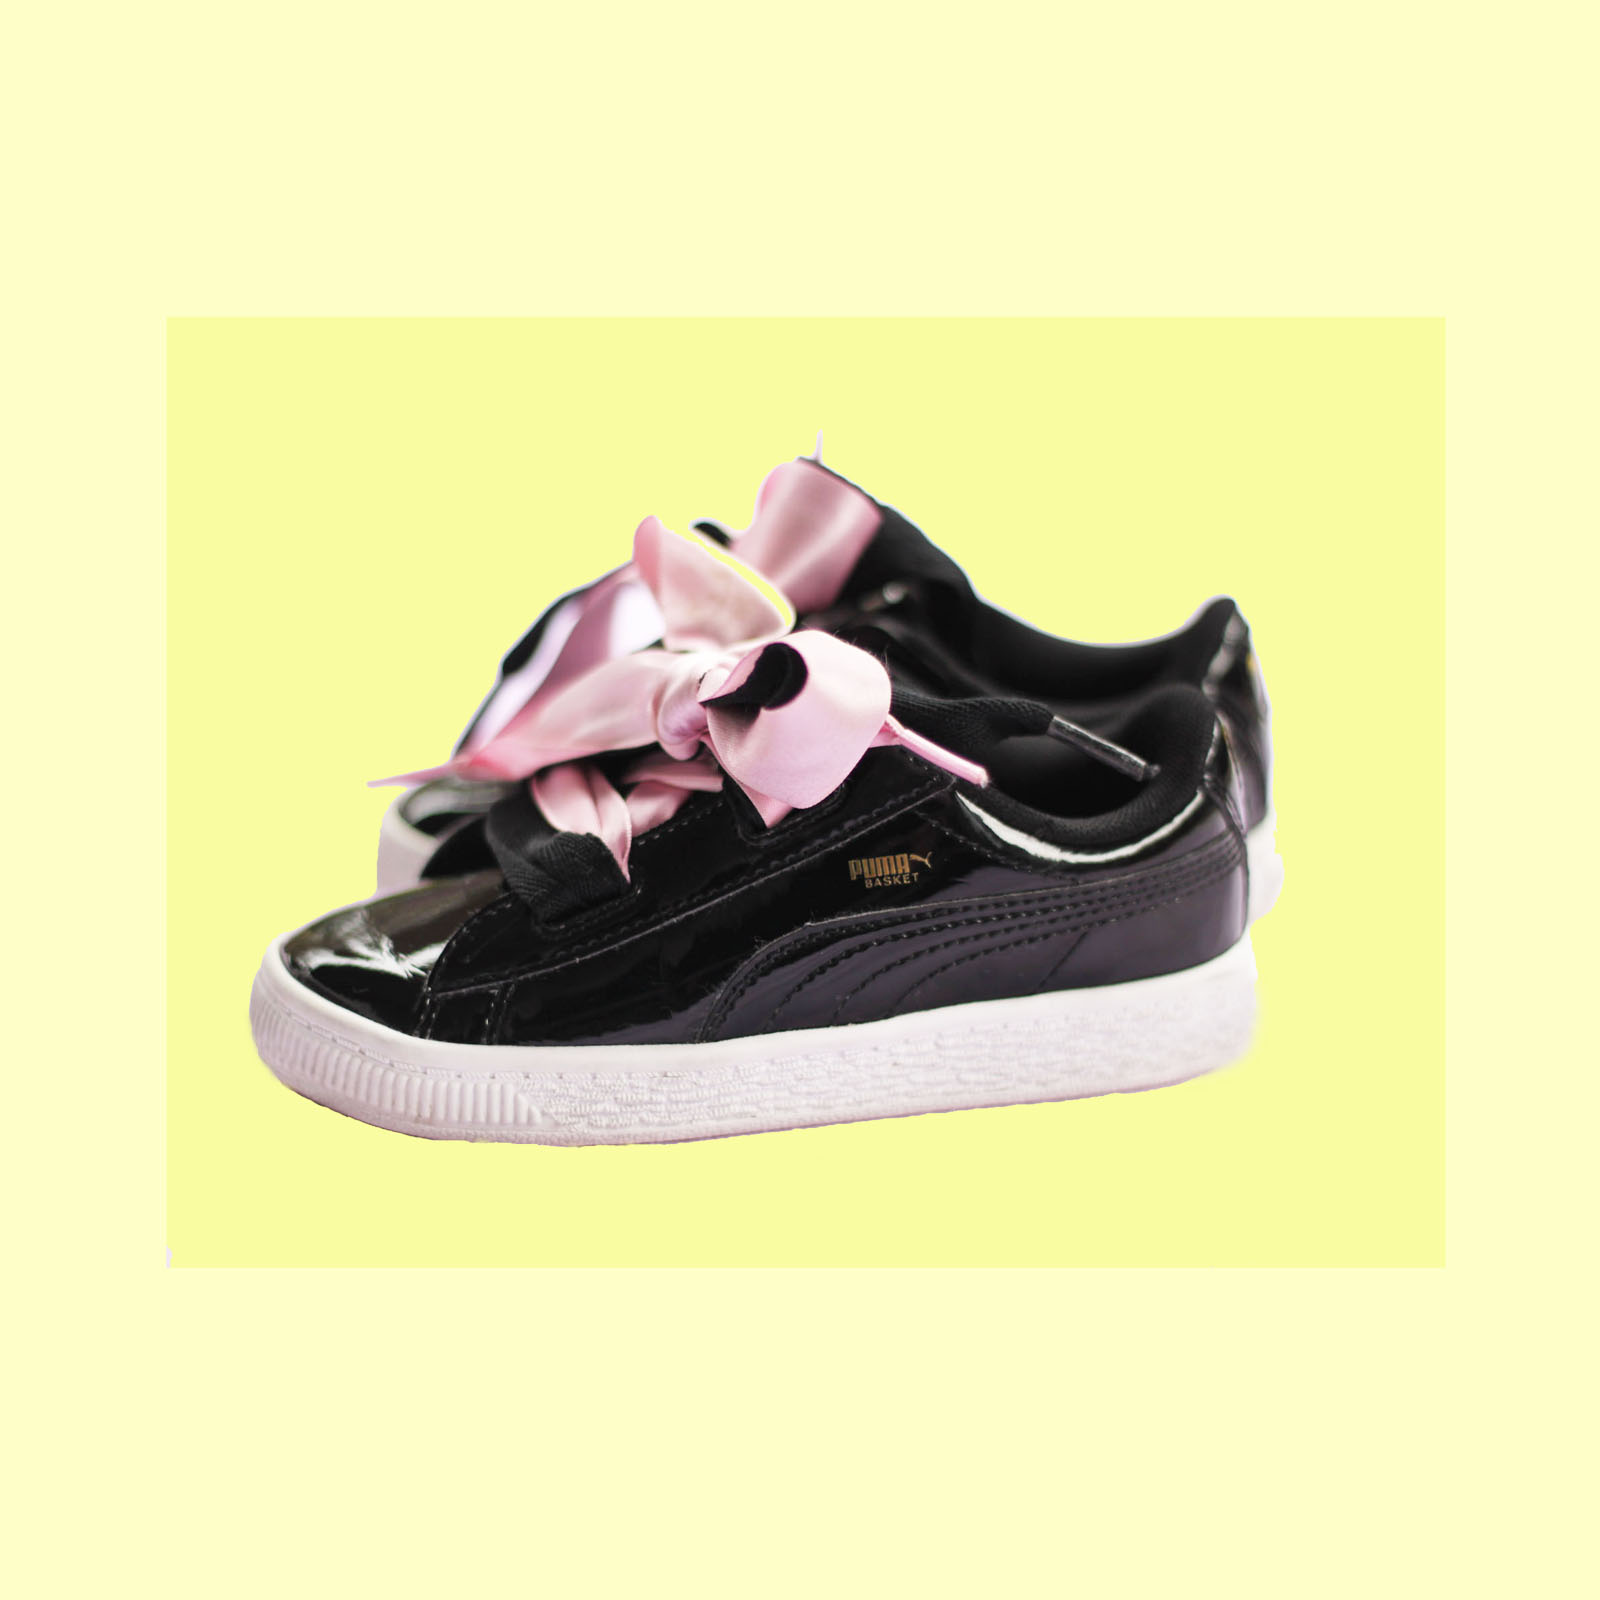 puma patent leather shoes